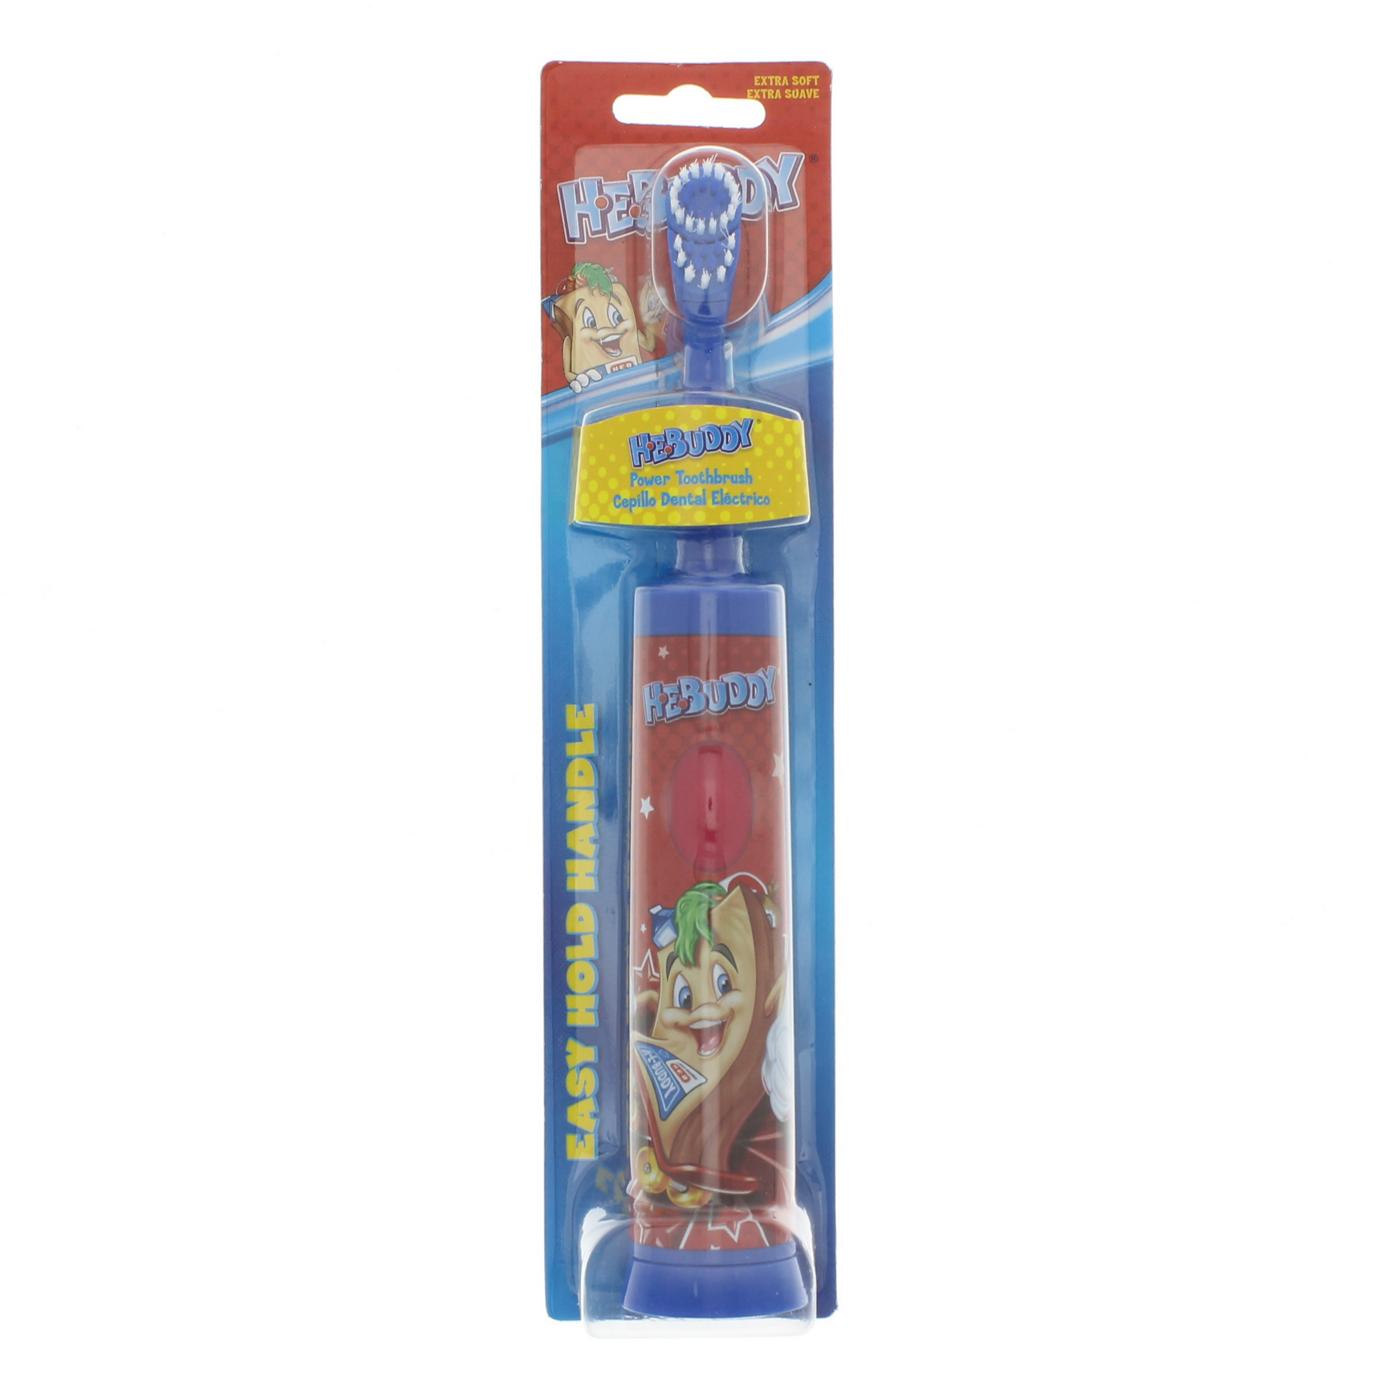 H-E-Buddy Kids Extra Soft Power Electric Toothbrush, Assorted Colors; image 2 of 2